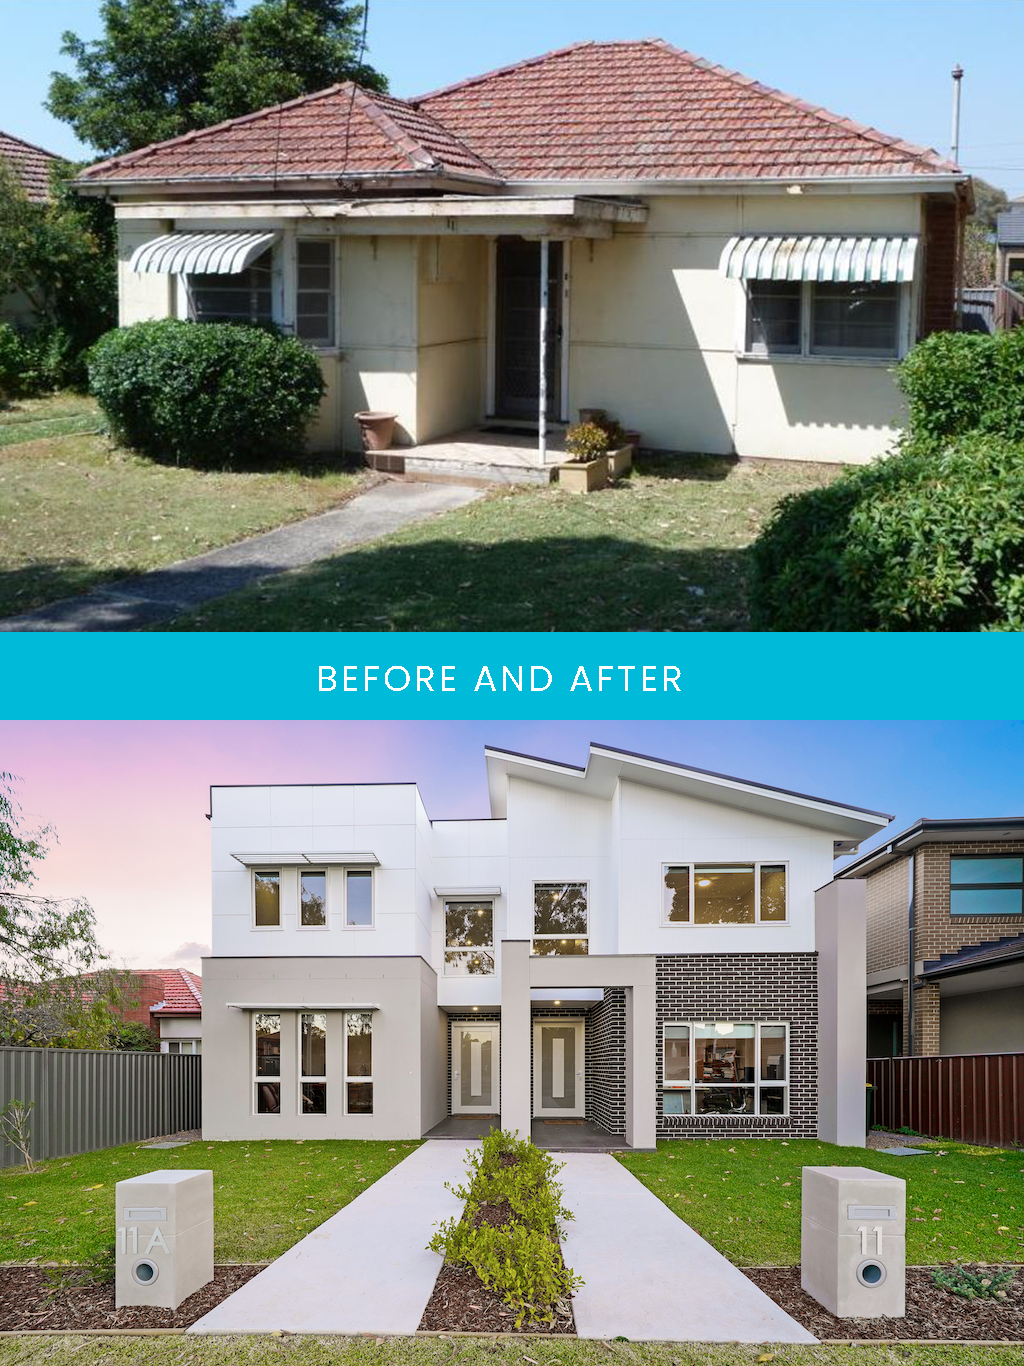 A before and after image of a knock down rebuild in Sydney